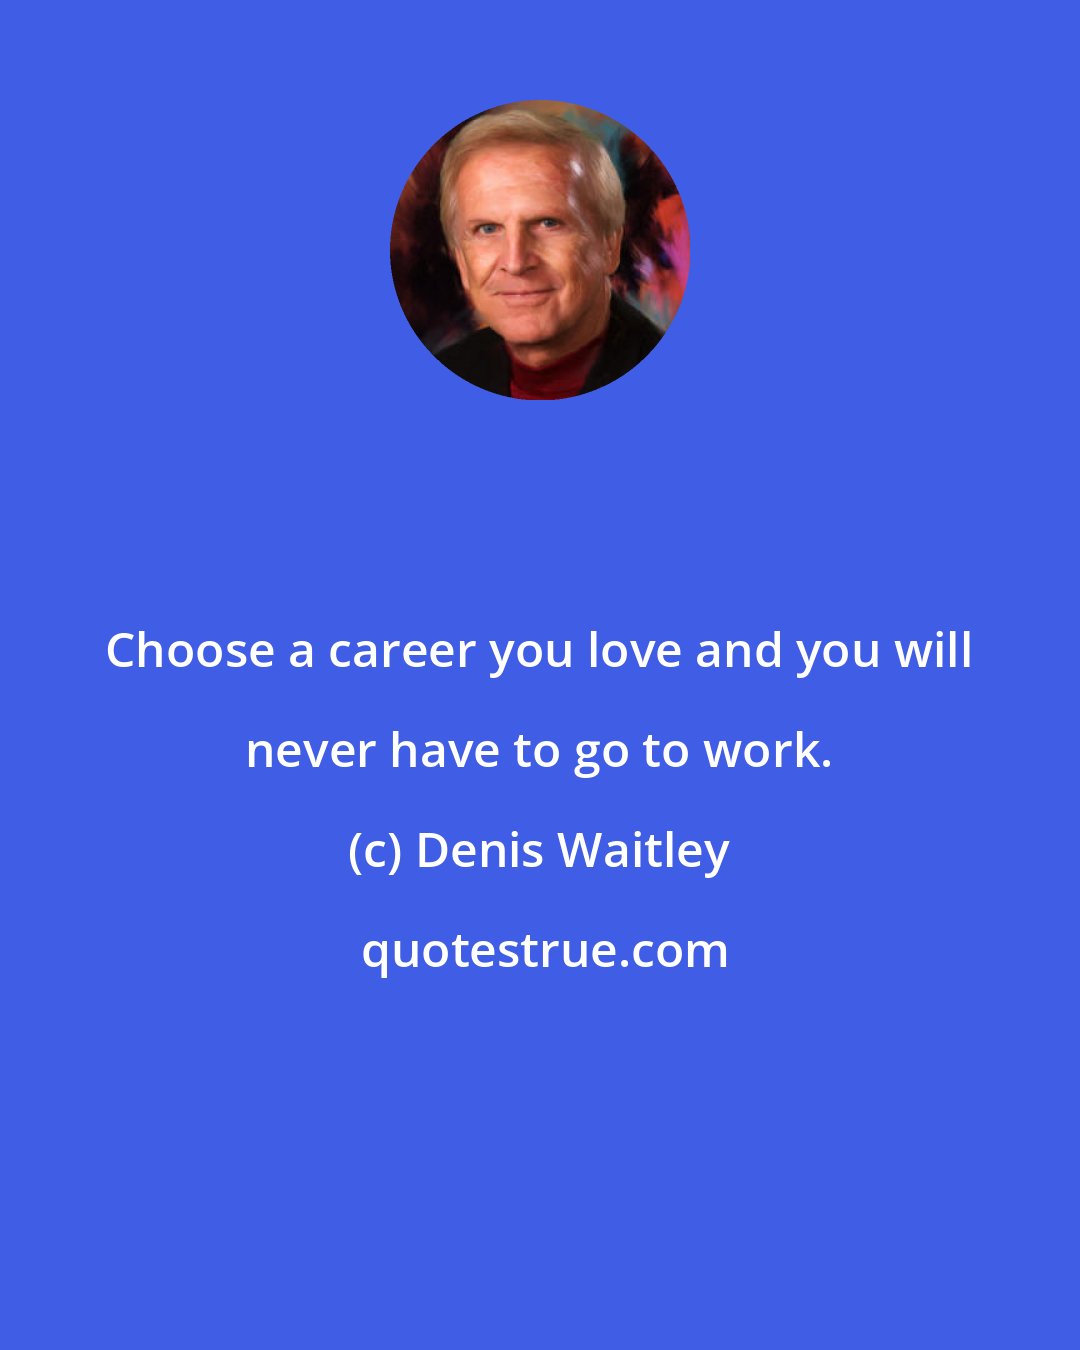 Denis Waitley: Choose a career you love and you will never have to go to work.